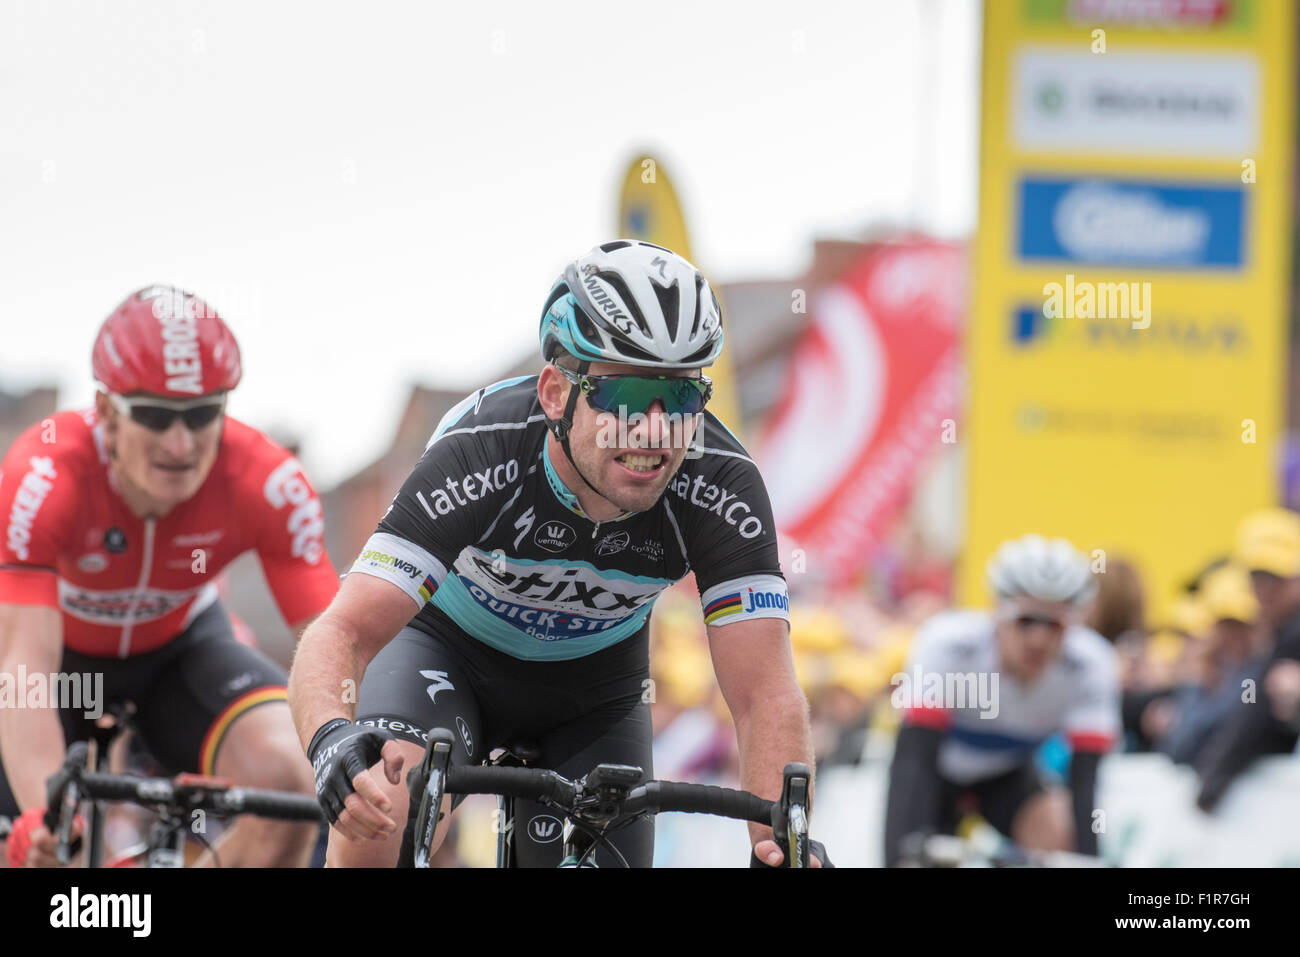 London, UK. 6th September, 2015. Mark Cavendish (Etixx Quickstep) reacts following his second place finish on stage one of the Aviva Tour of Britain between Beaumaris and Wrexham, United Kingdom on 6 September 2015. The race starts on 6 September in Beaumaris, Anglesey, and ends on 13 August in London, United Kingdom. Credit:  Andrew Peat/Alamy Live News Stock Photo